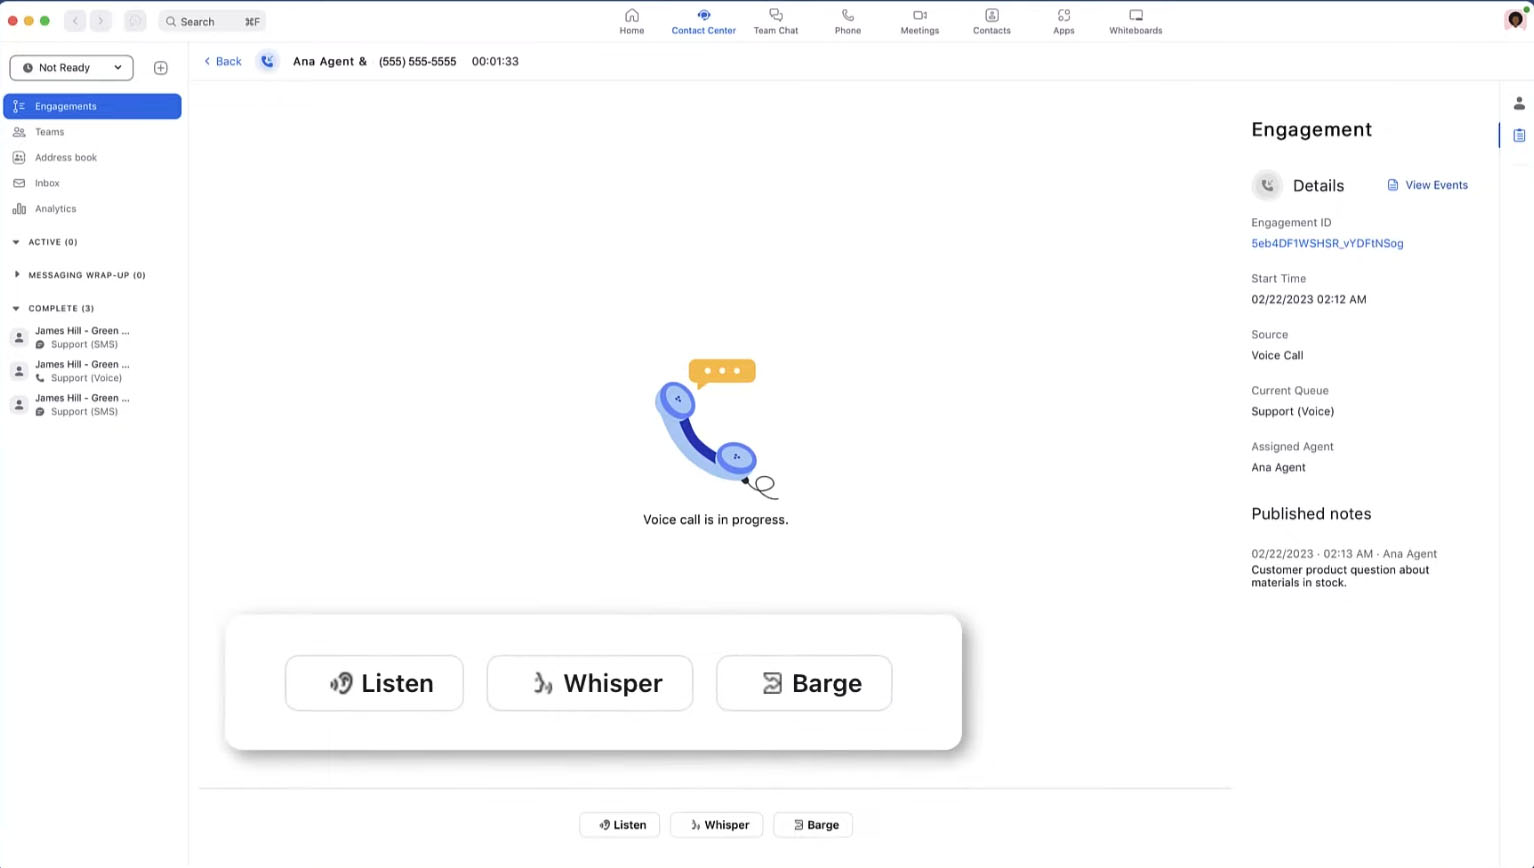 Zoom Contact Center interface showing a live voice call with the call monitoring options "Listen," "Whisper," and "Barge" displayed in a larger size.